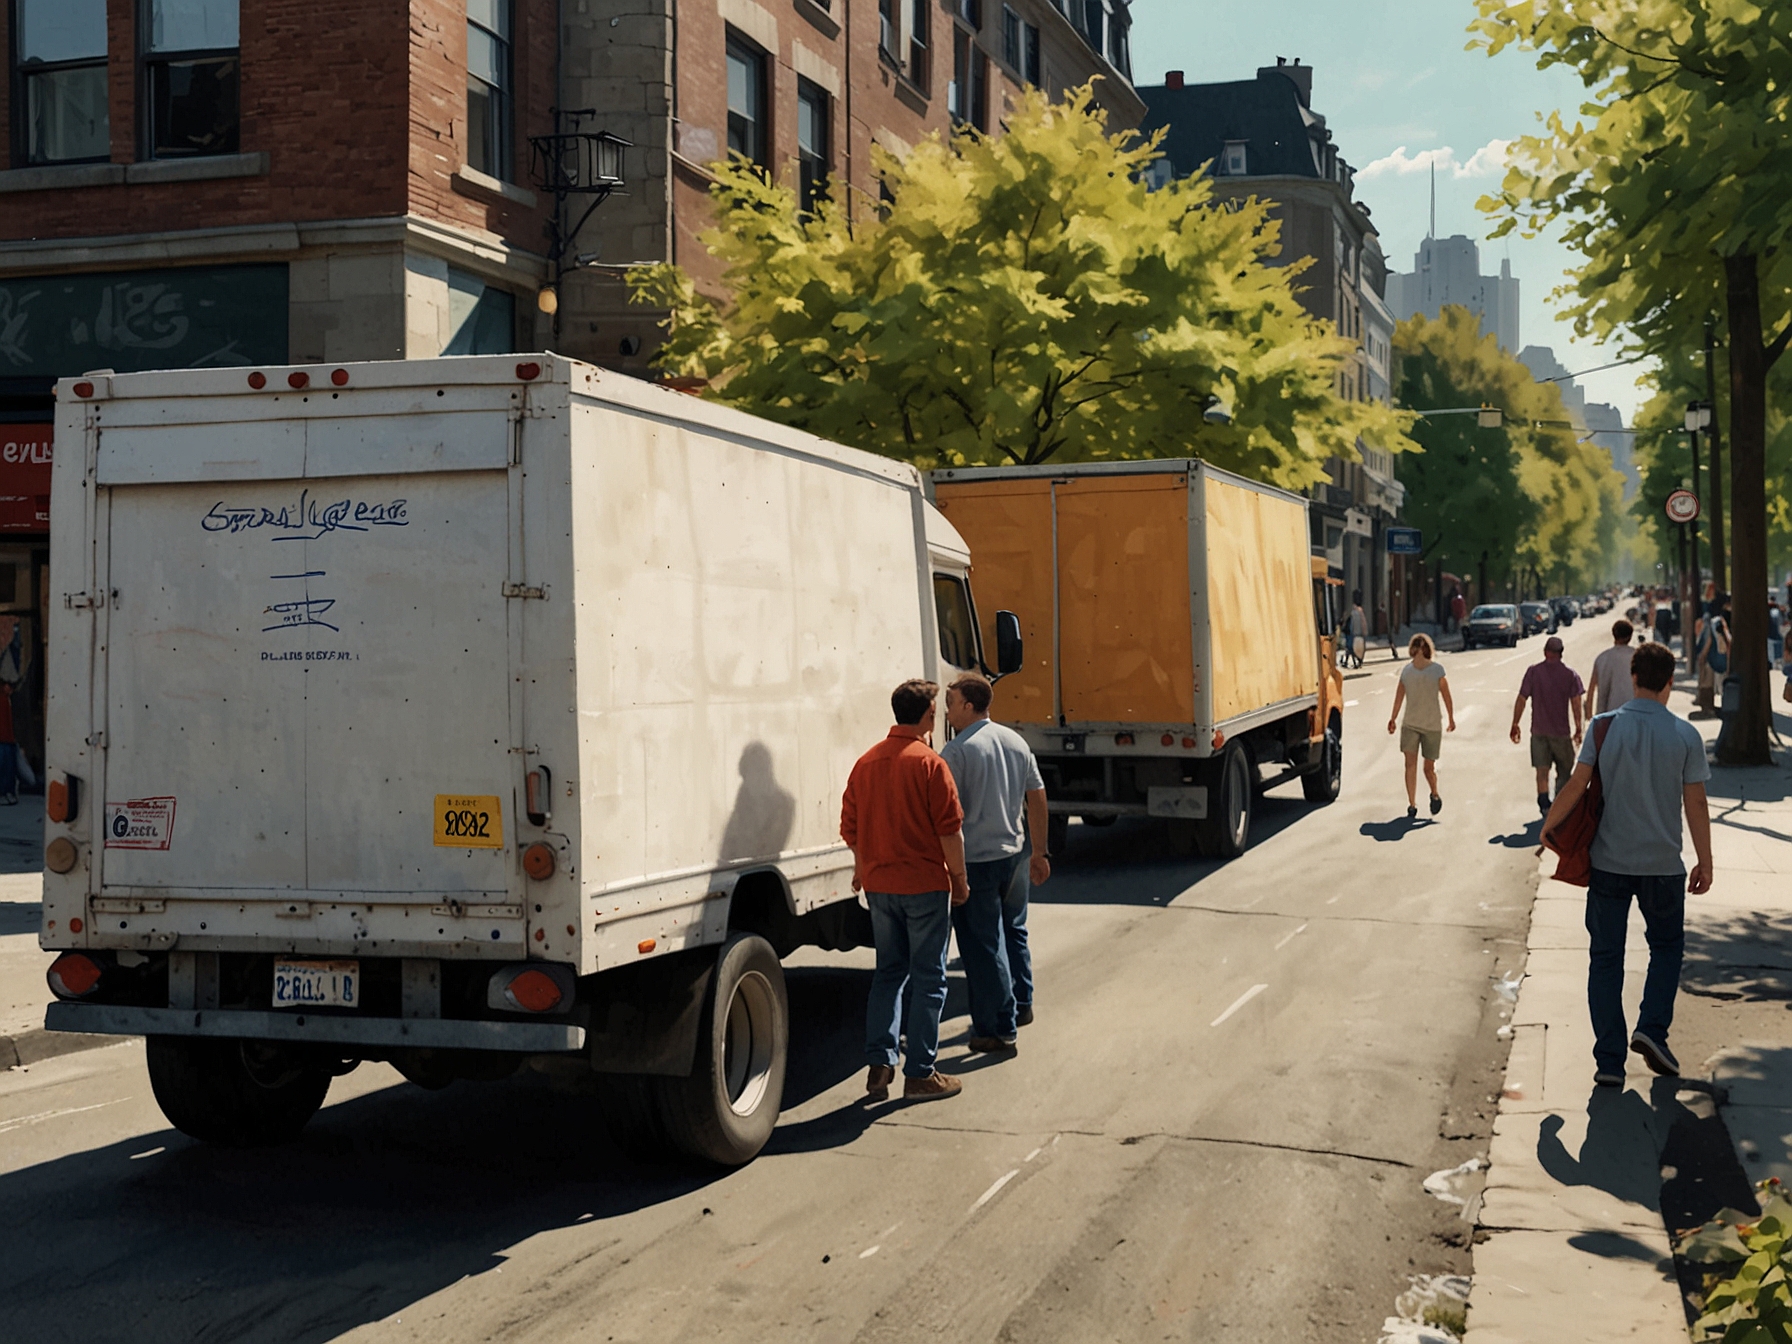 Streets full of moving trucks and people carrying furniture, representing the traditional bustle of Quebec's Moving Day. The image reflects the hustle of residents shifting homes.